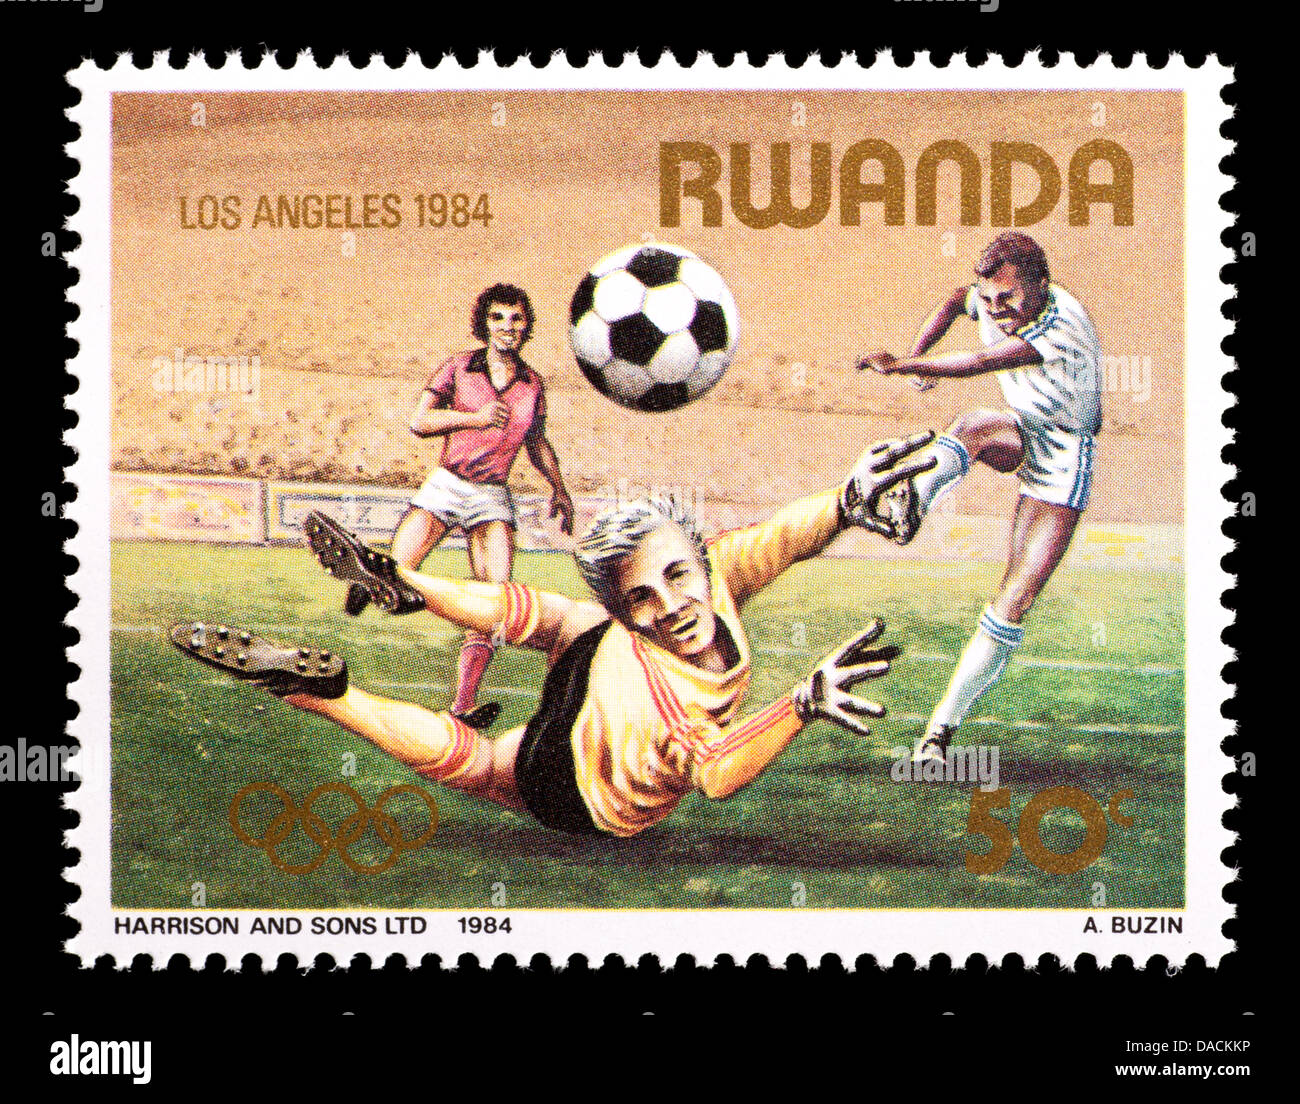 Postage stamp from Rwanda depicting a soccer game, issued for the 1984 Los Angeles Olympic Games. Stock Photo